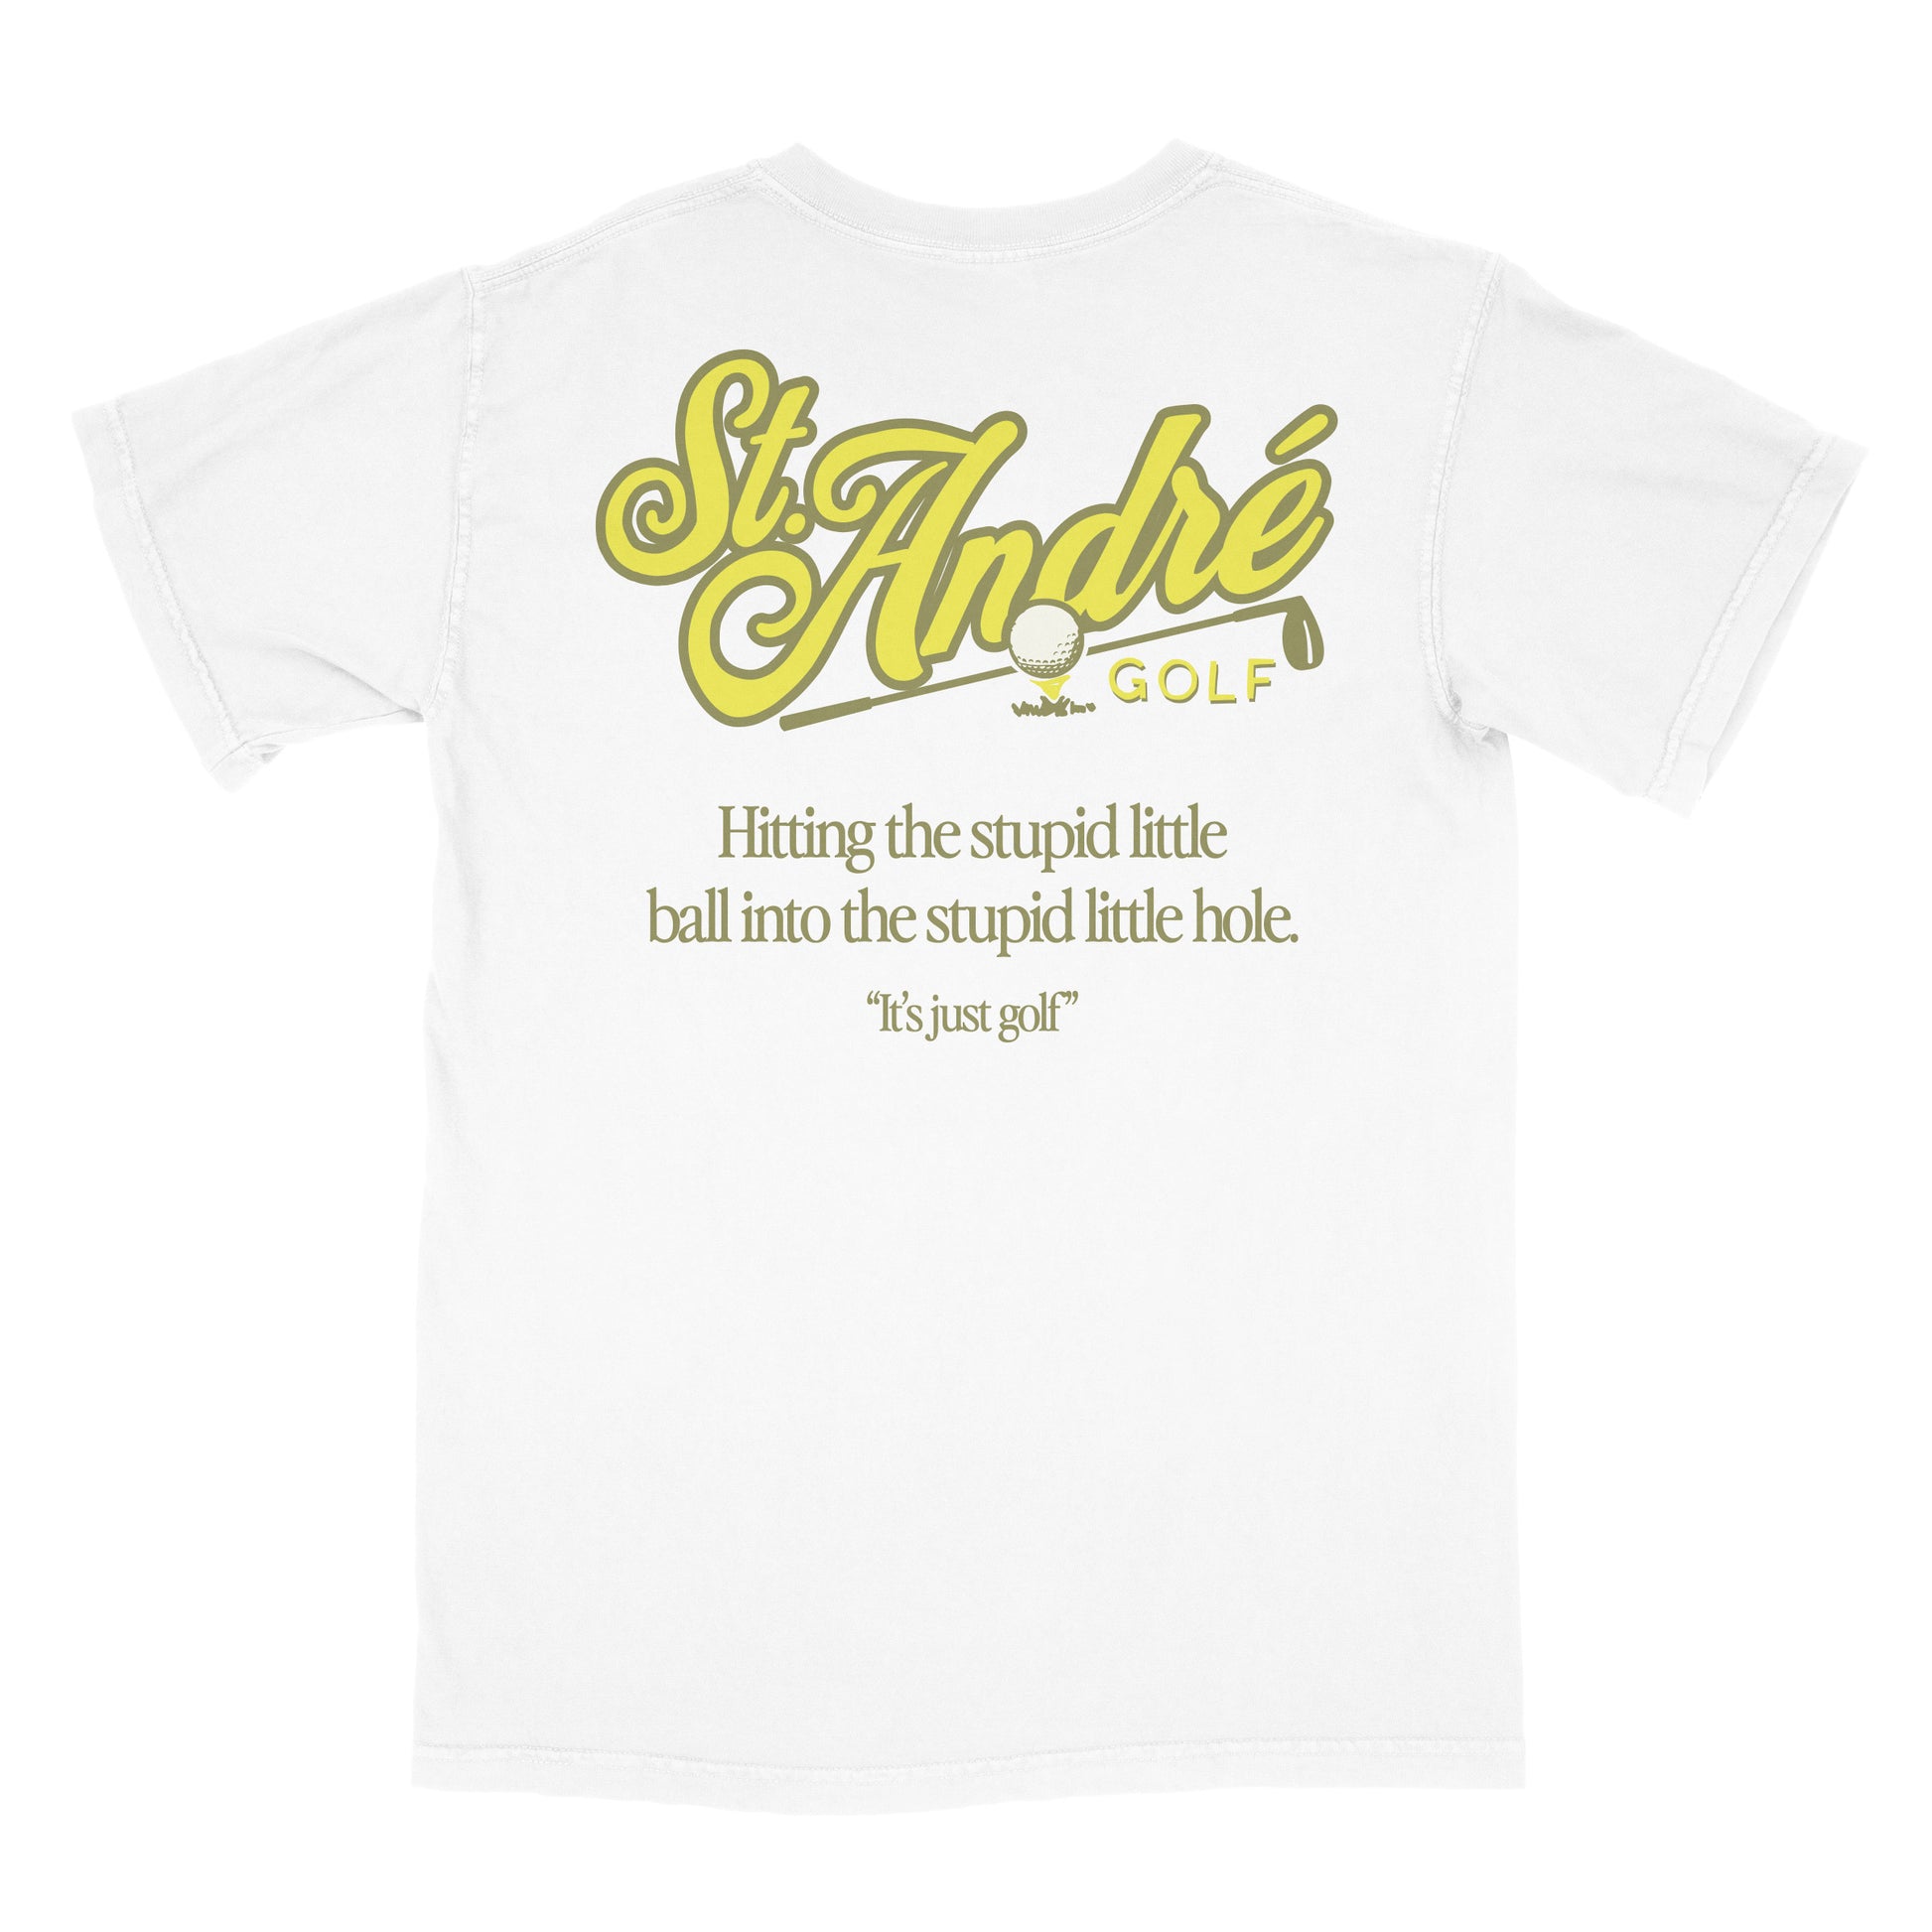 Hitting the stupid little ball into the stupid little hole - funny golf shirt